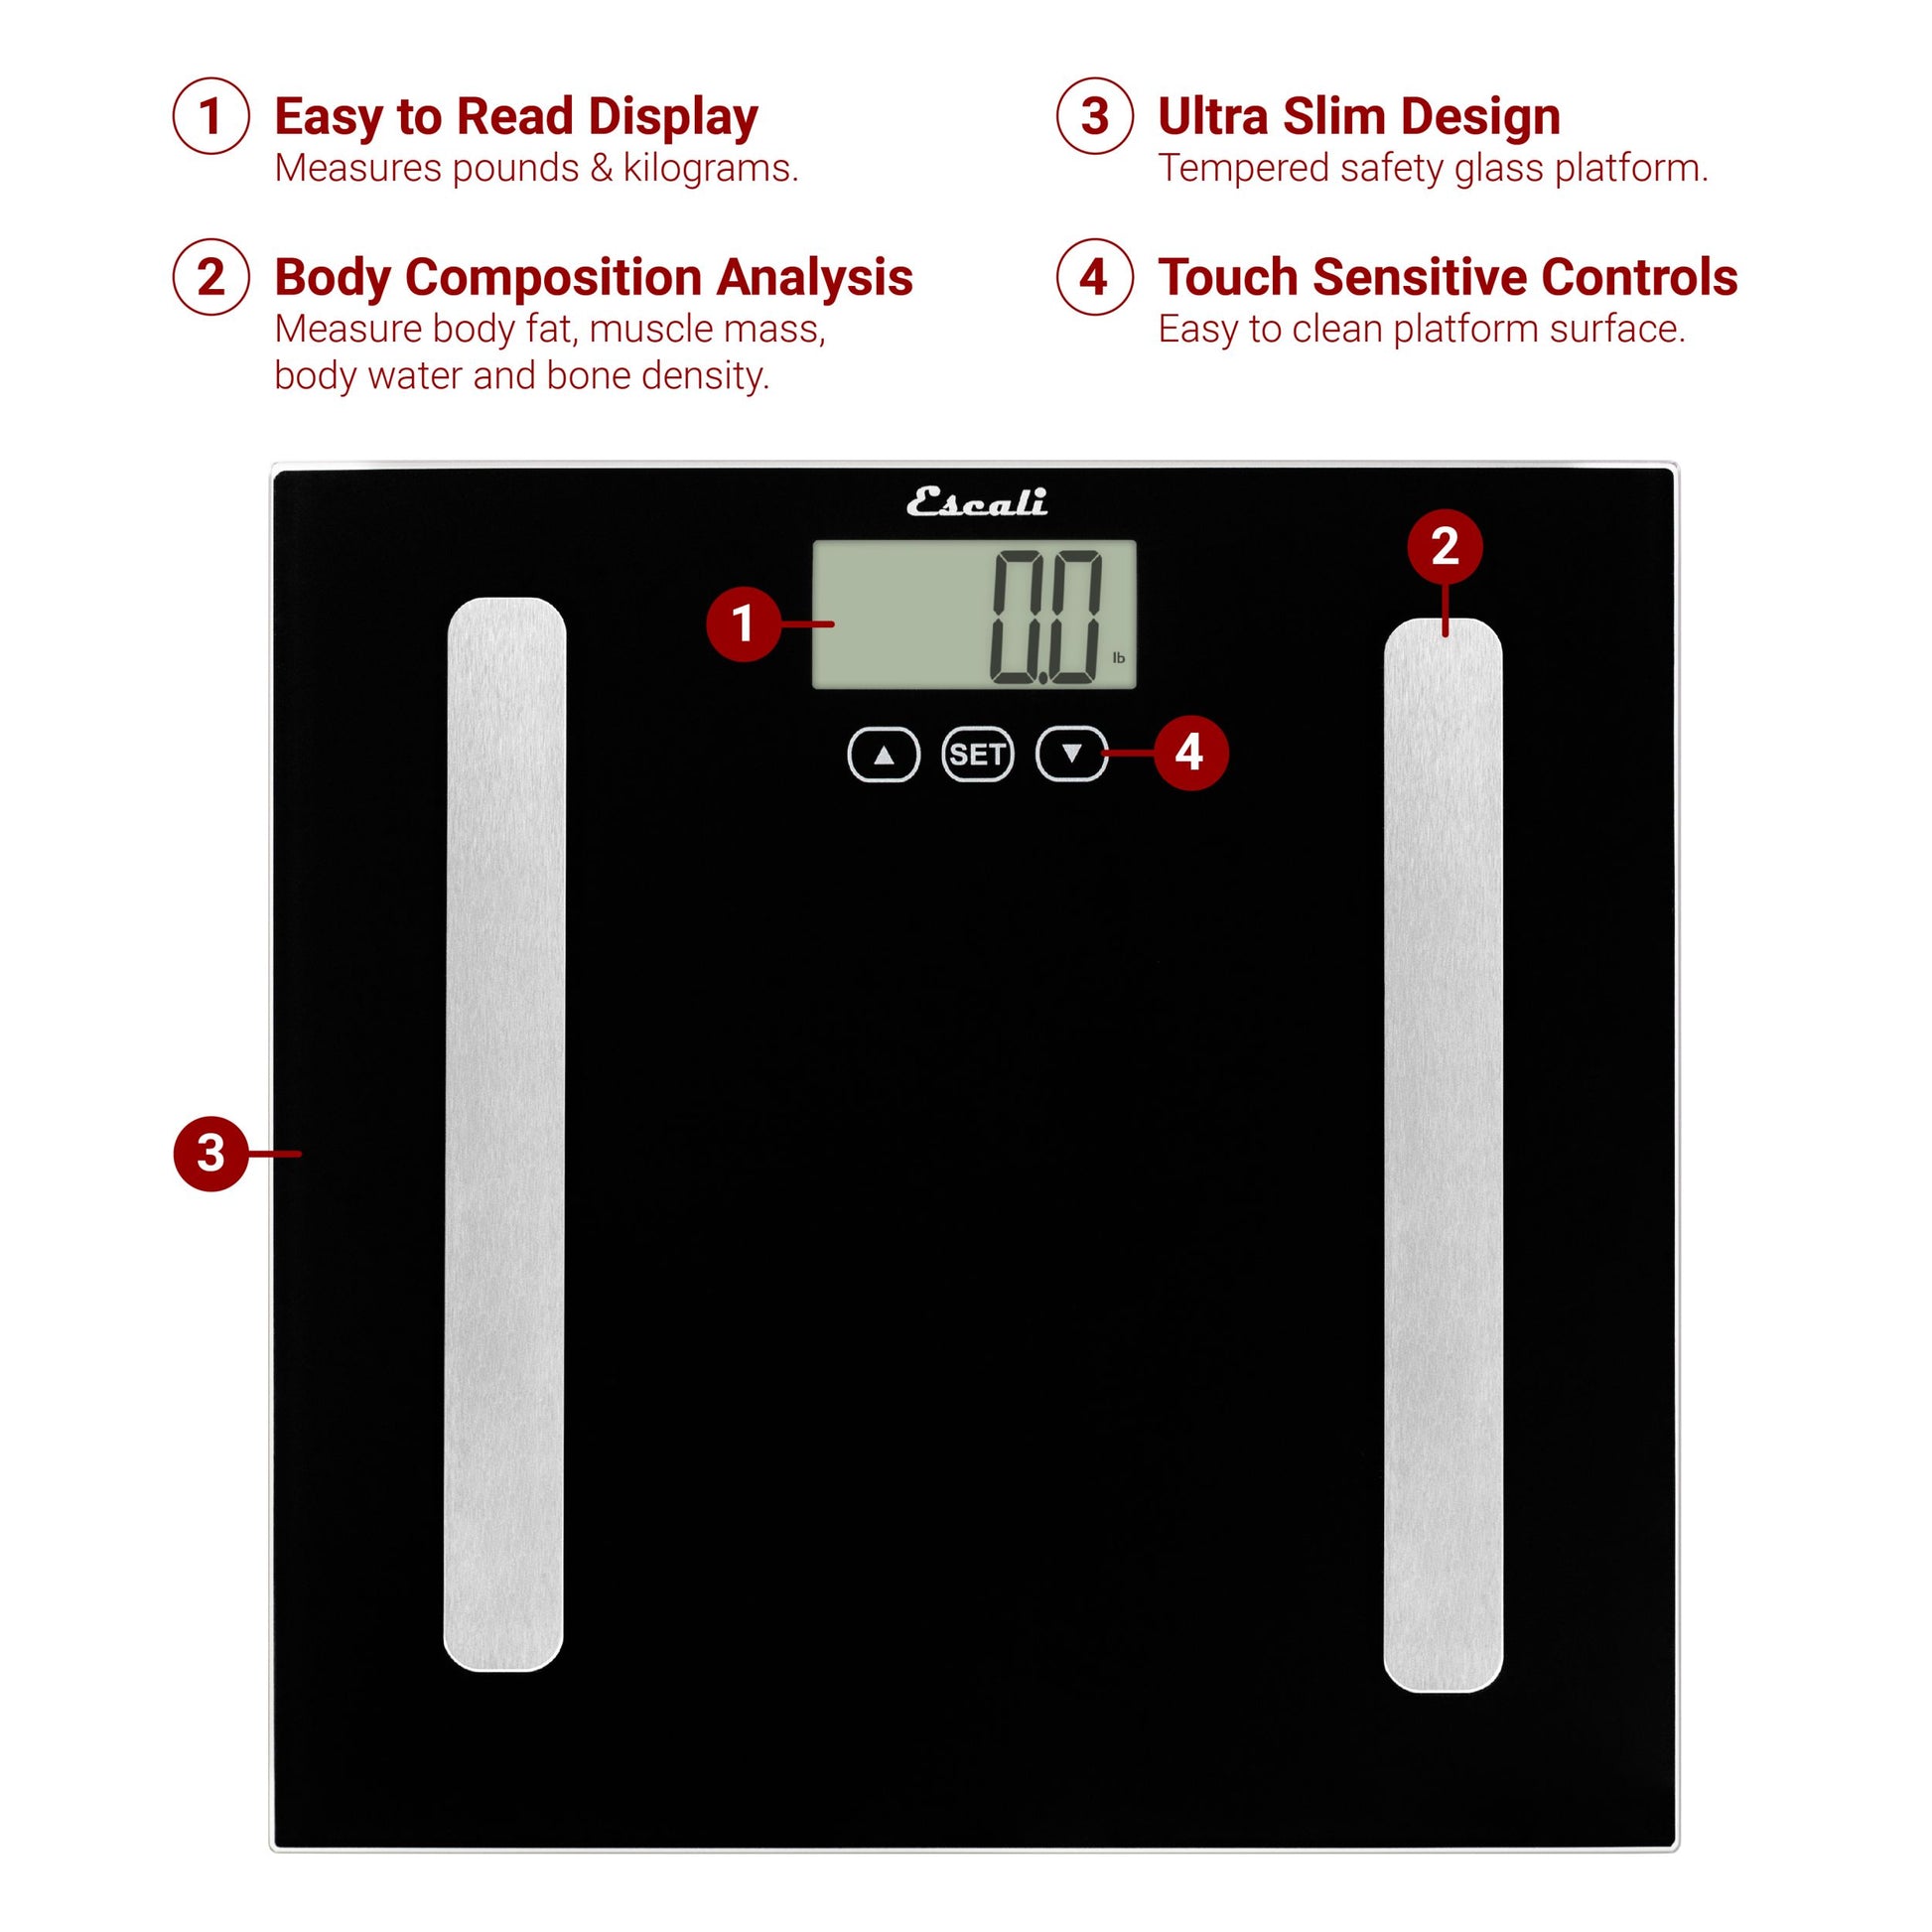 Still Using a Body Fat Scale? We Have a Better Option - The Sosa Clinic